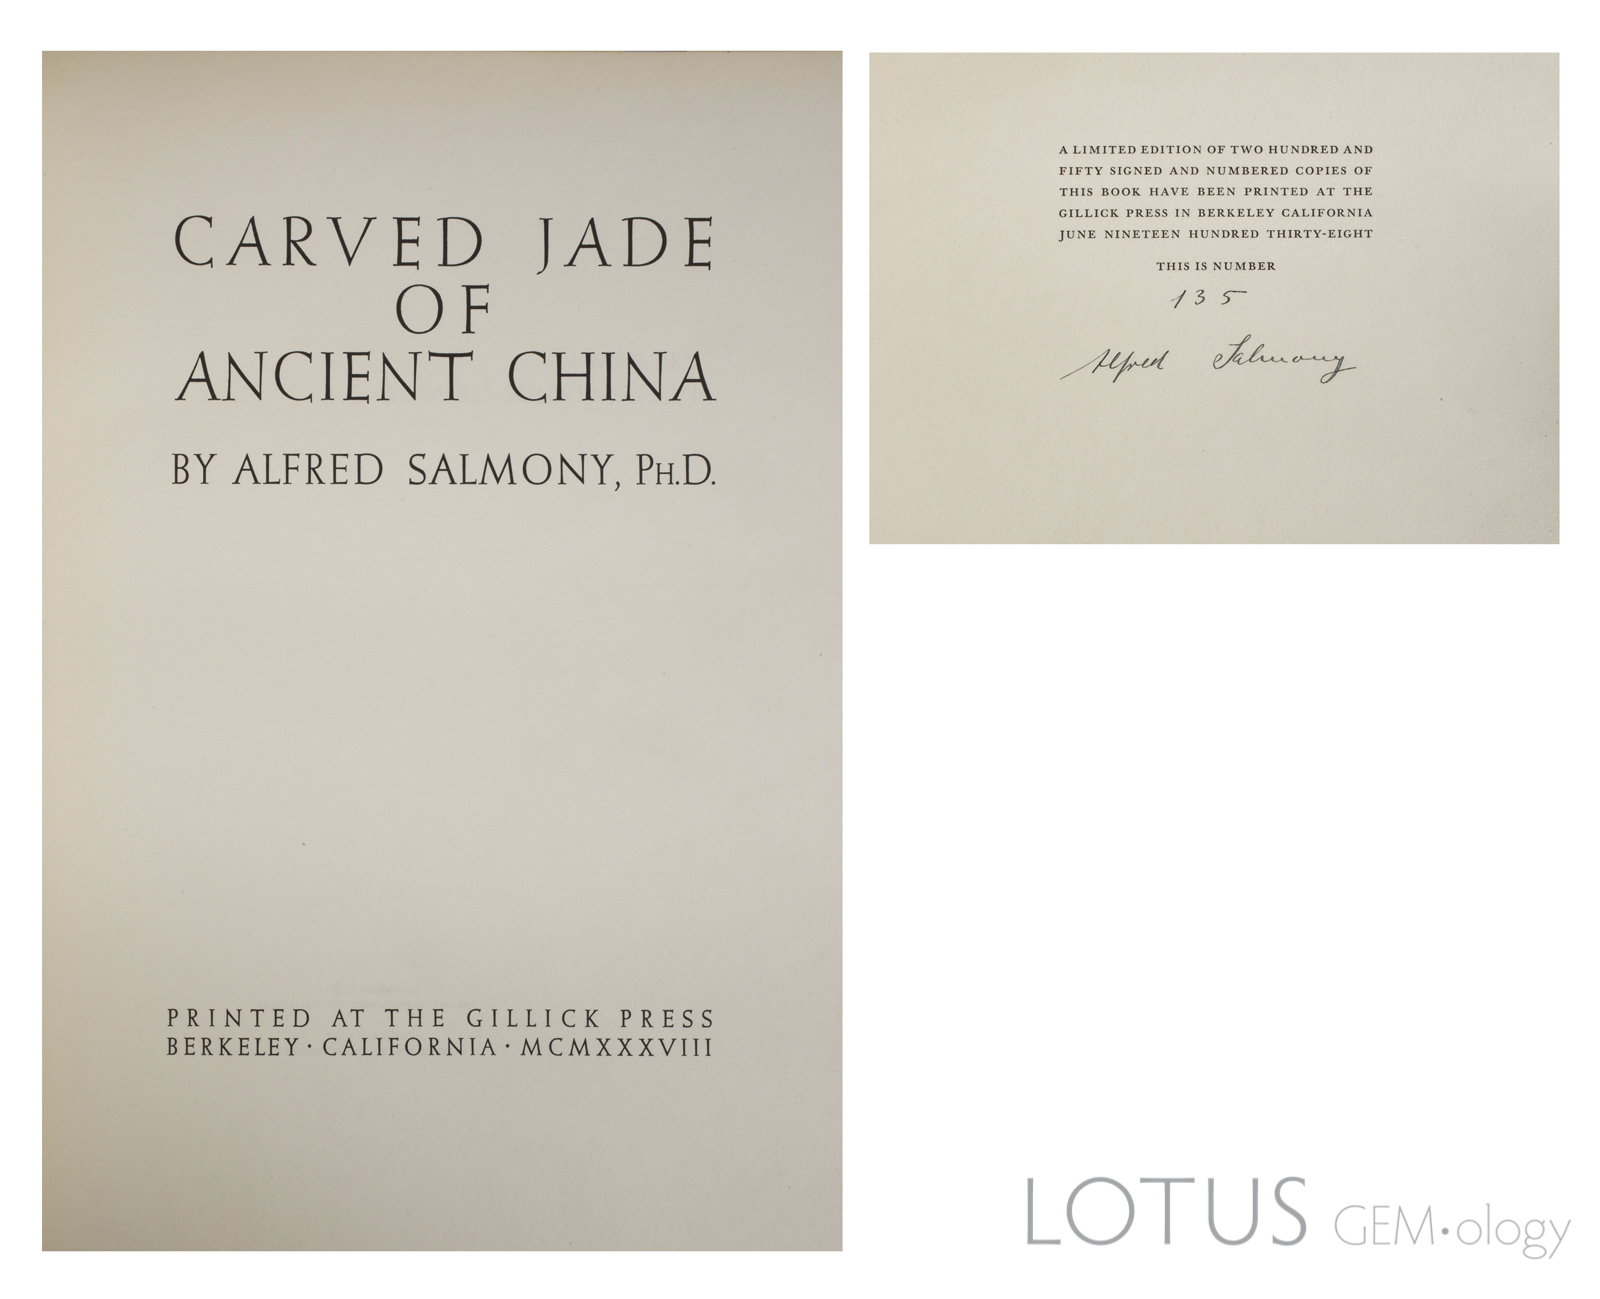 The title page and limited-edition page of Alfred Salmony's Carved Jades of Ancient China. Limited editions are highly collectable, and may fetch anywhere from two to five times more than the standard editions.